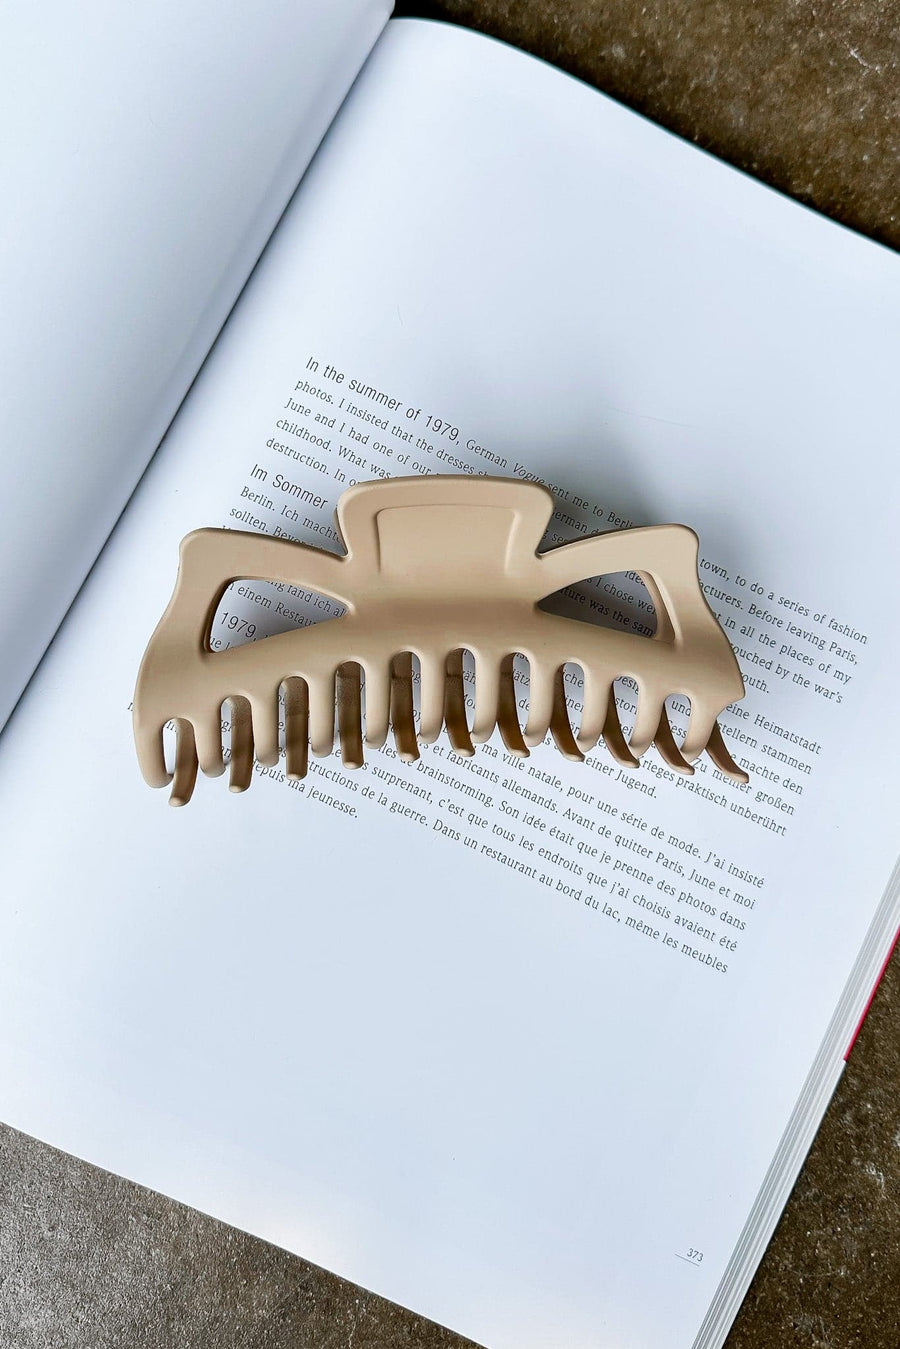 Clay Beige Holding it Together Oversized Hair Clip - kitchencabinetmagic